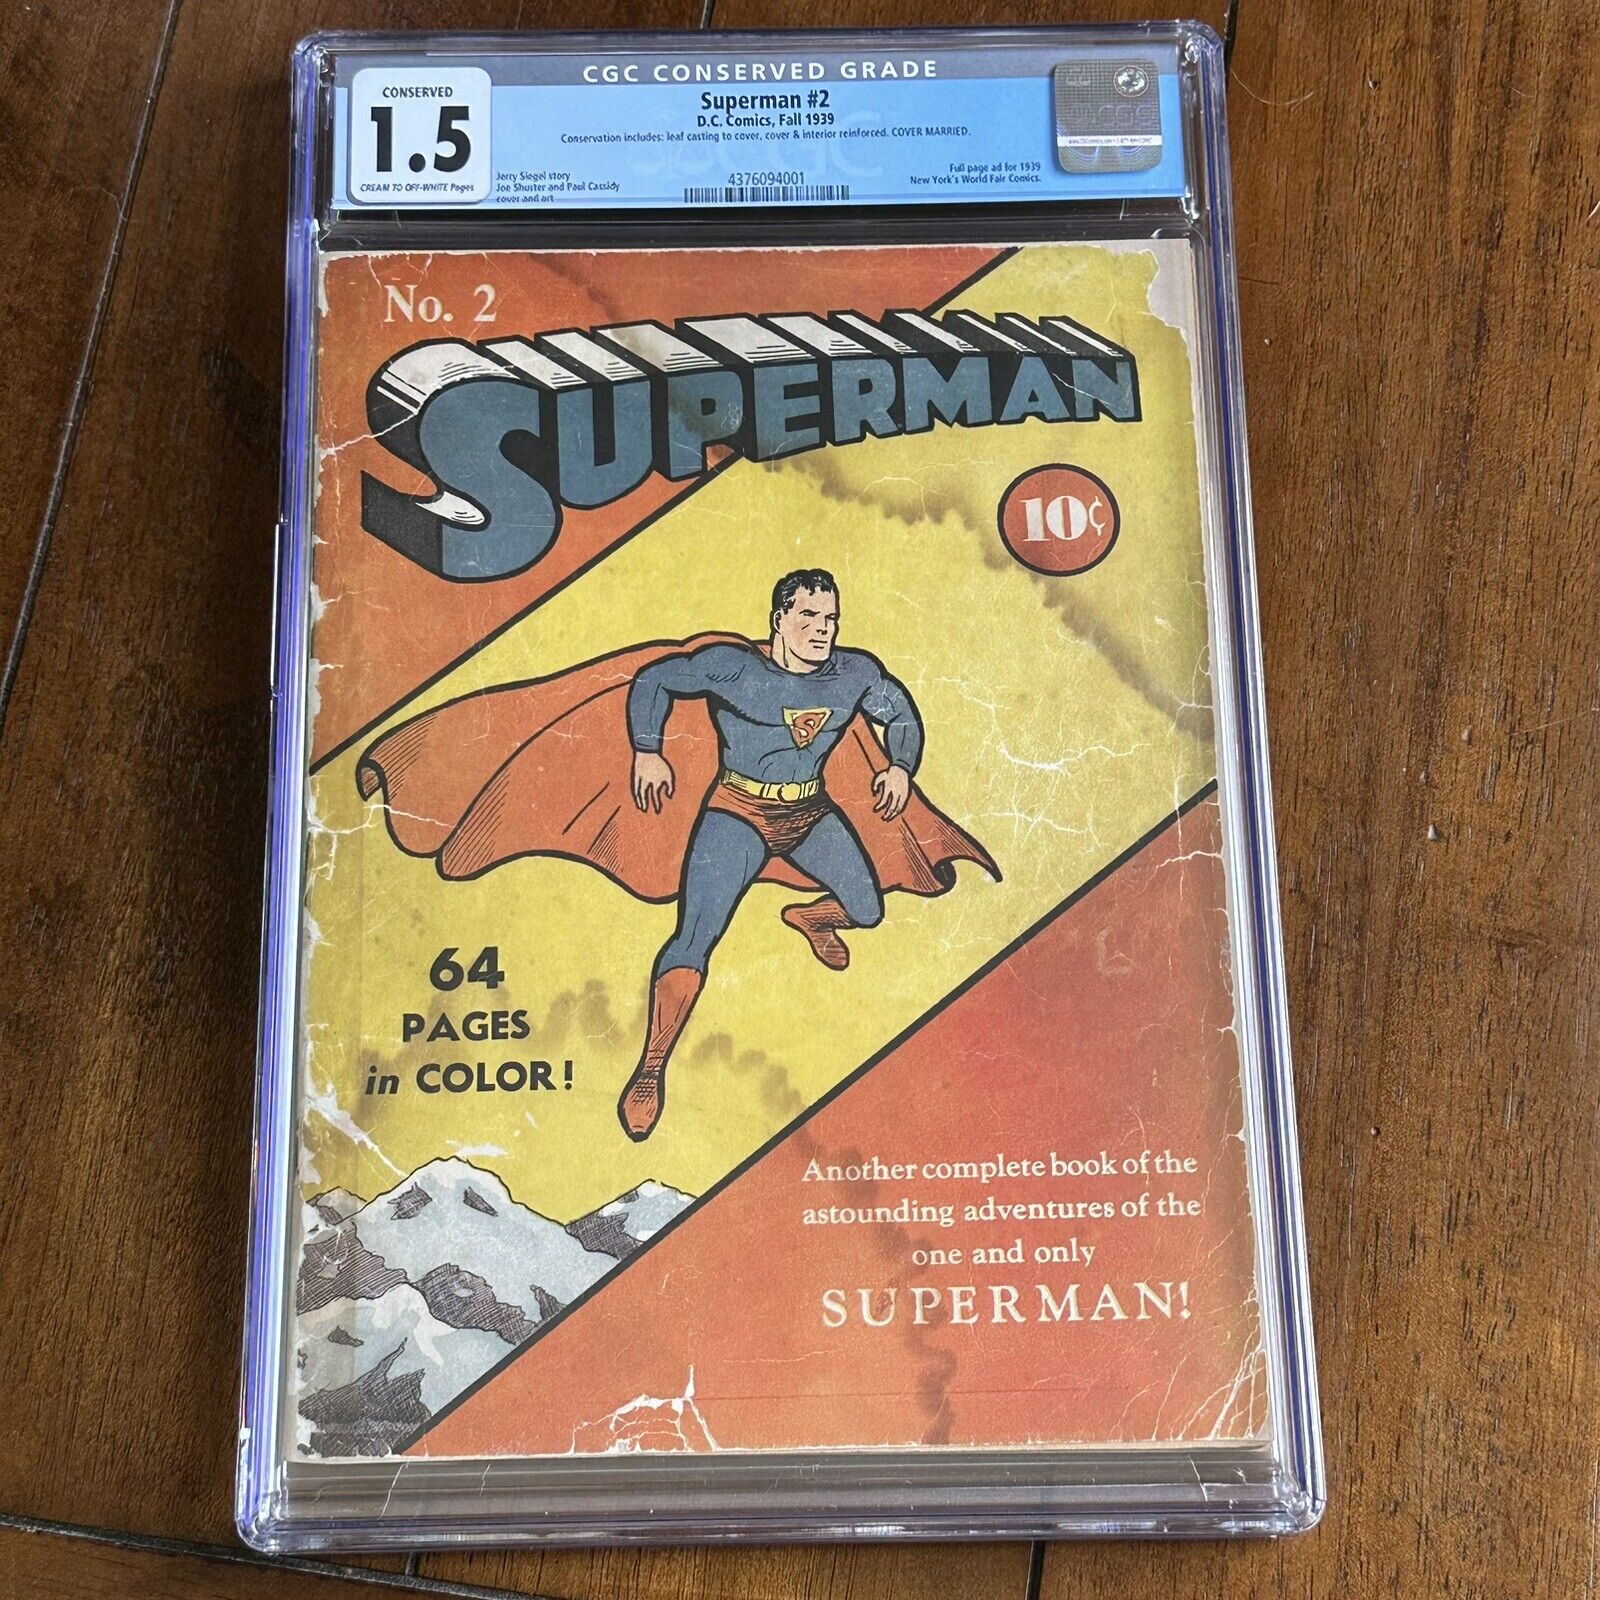 Superman #2 (1939) - Golden Age - CGC 1.5 (Conserved)